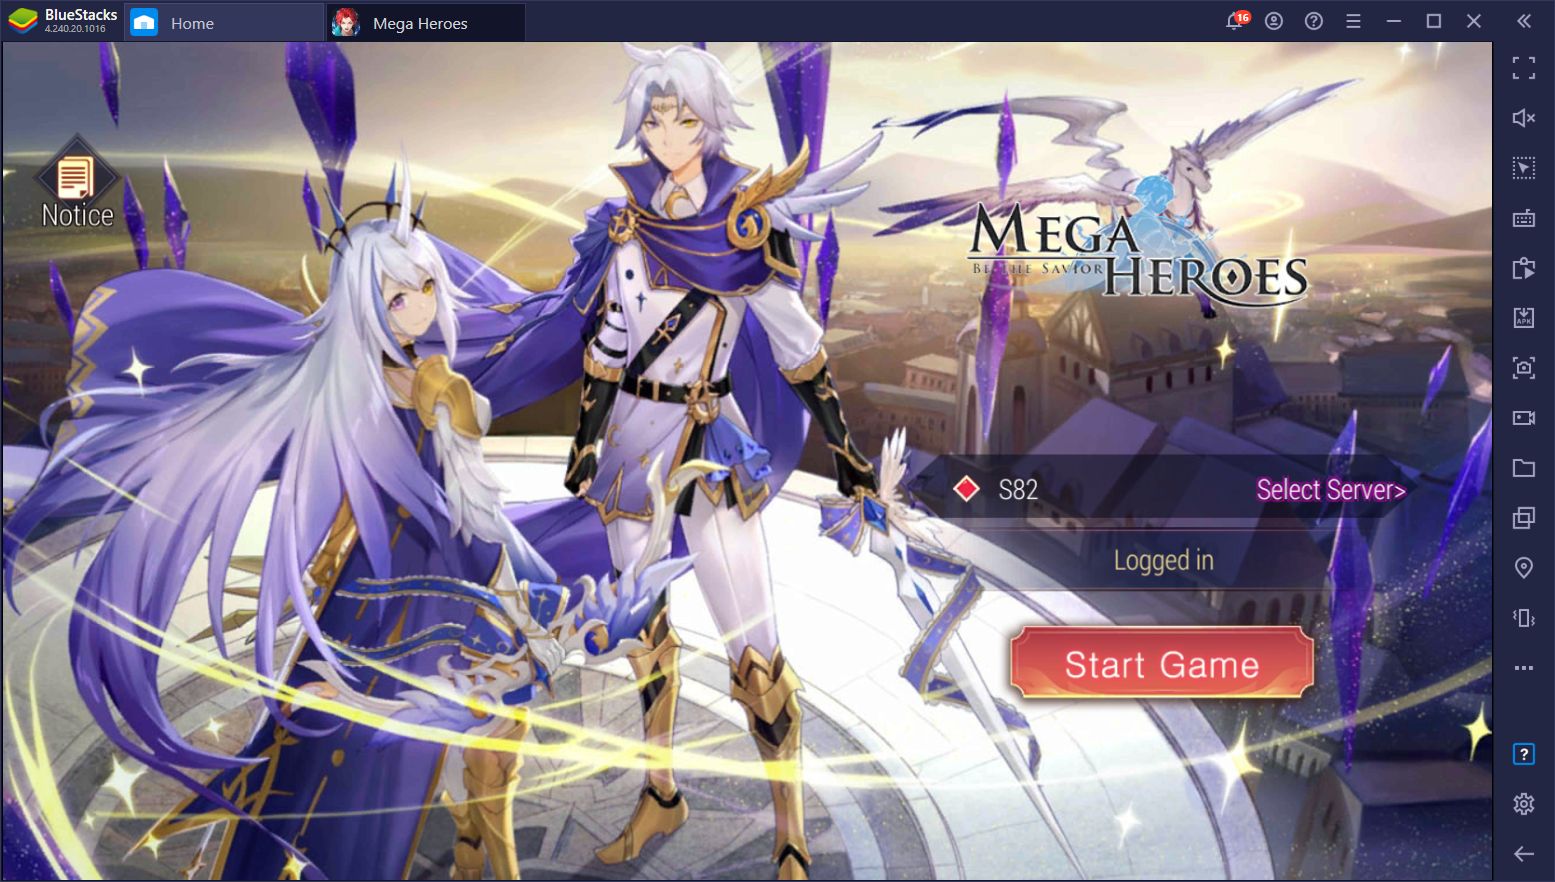 Mega Heroes - How to Play This Mobile MMORPG on PC